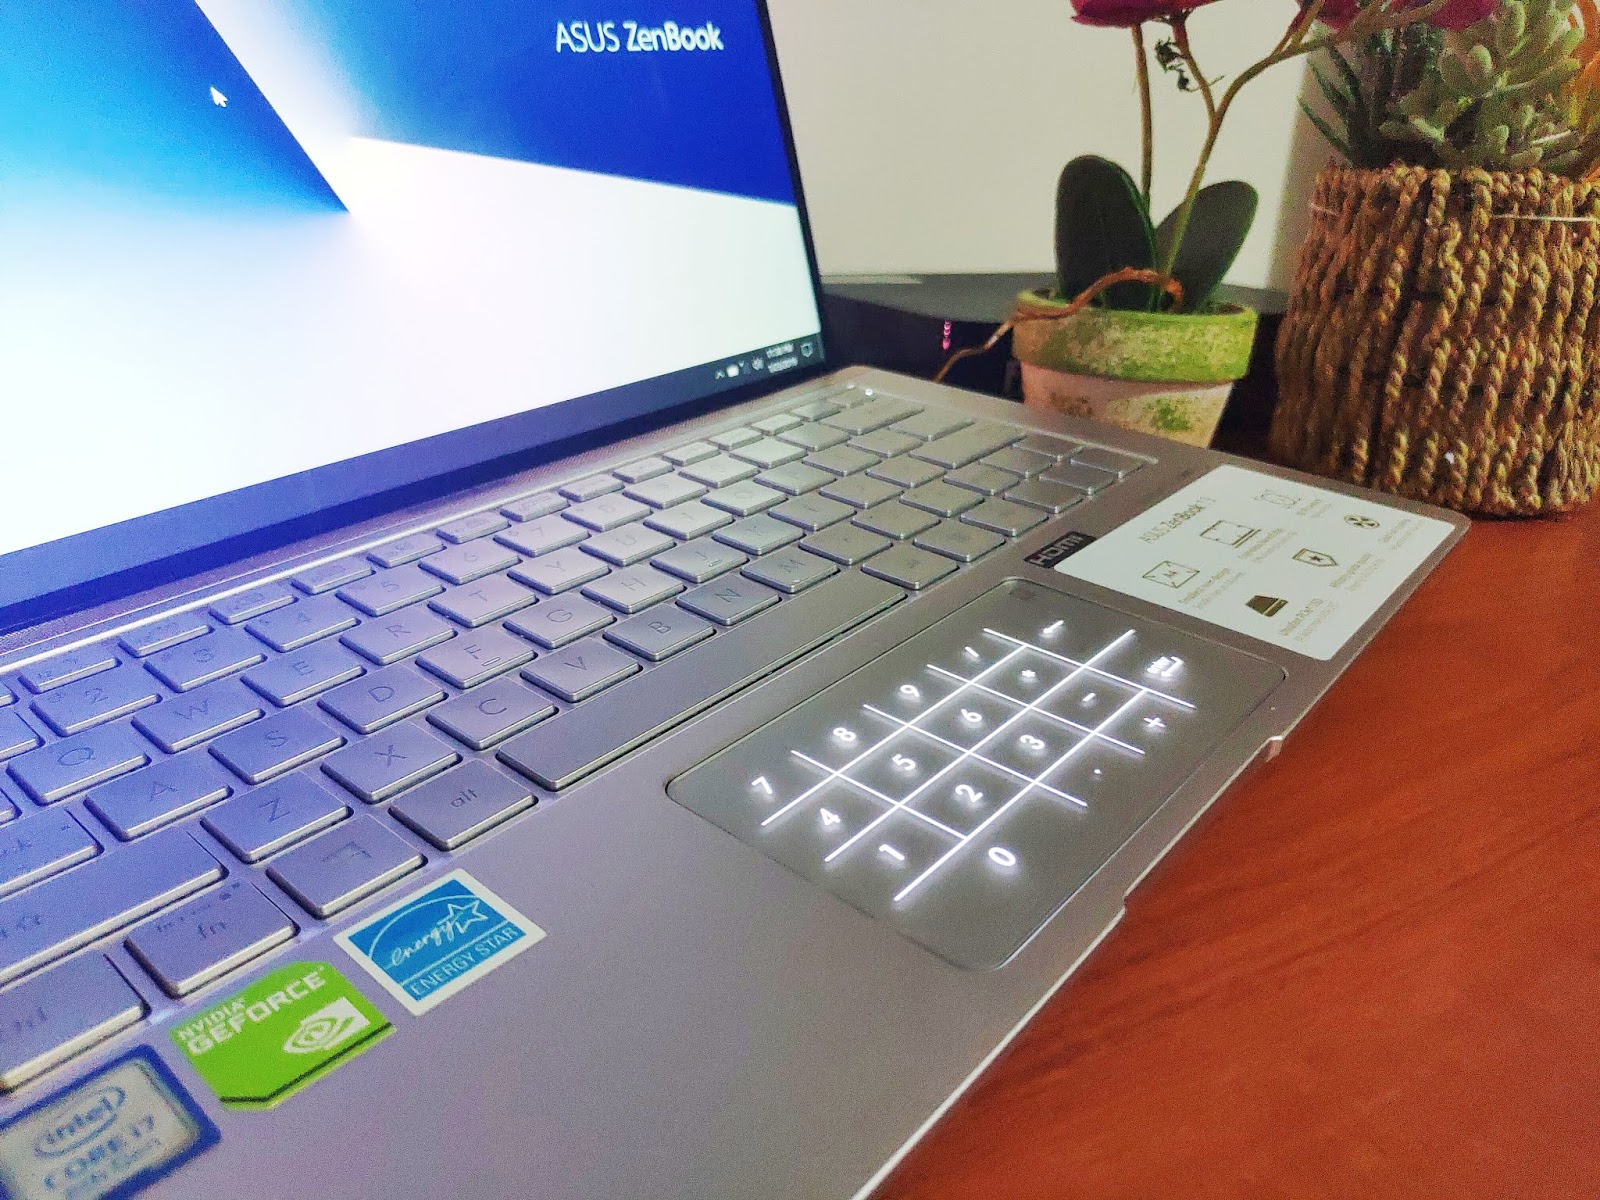 Asus zenbook ux3405. ZENBOOK ux333f. Асус number Pad. ASUS ux333. ASUS ZENBOOK 14 Keyboard and Touchpad Light.